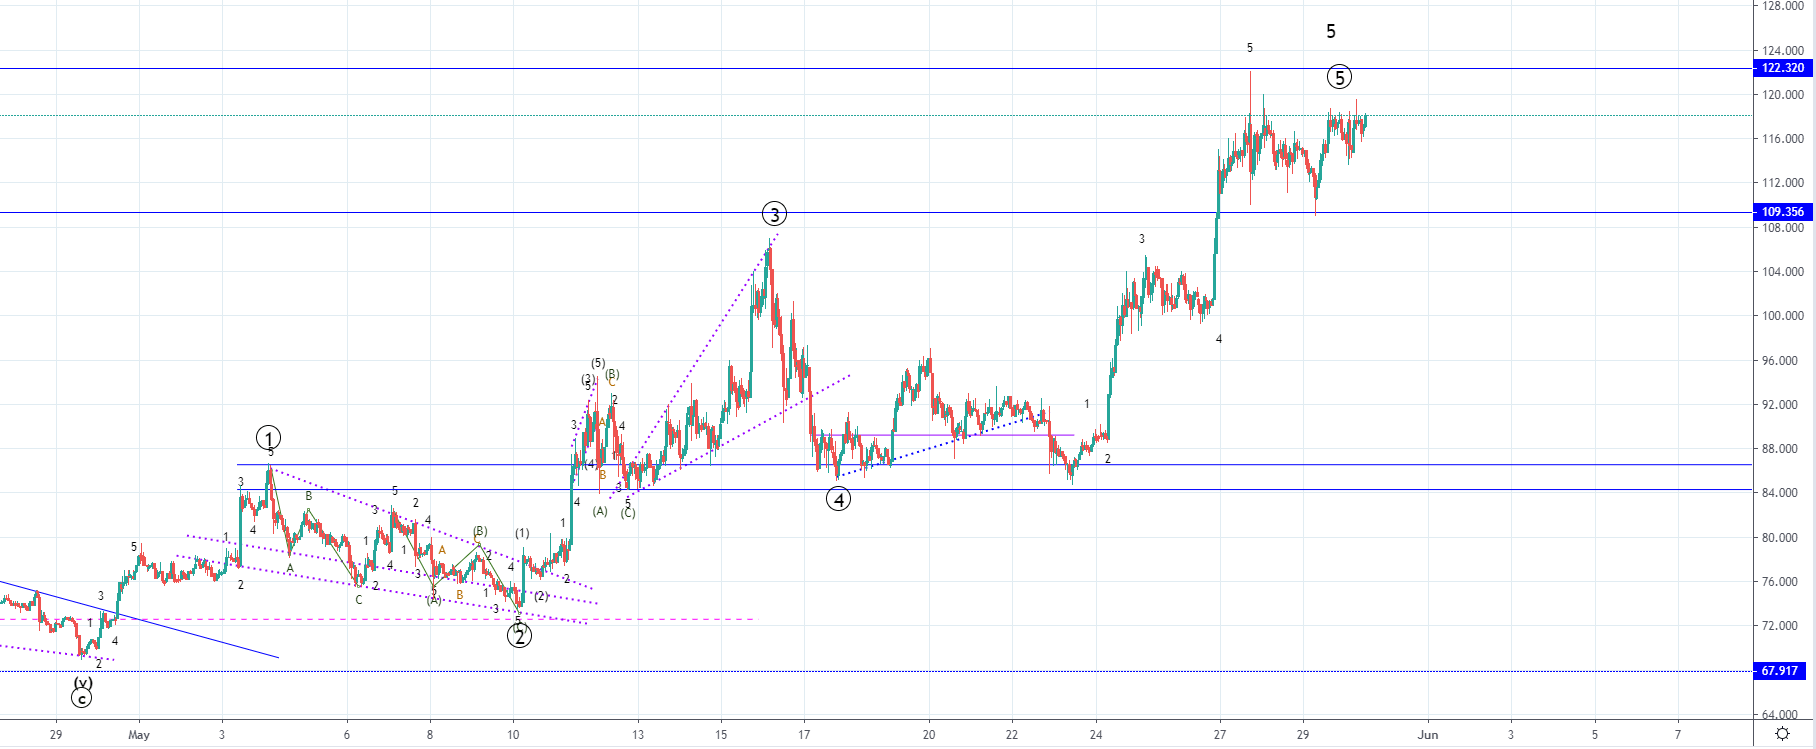 LTC/USD and EOS/USD close to completion of the ending wave, downturn shortly expected